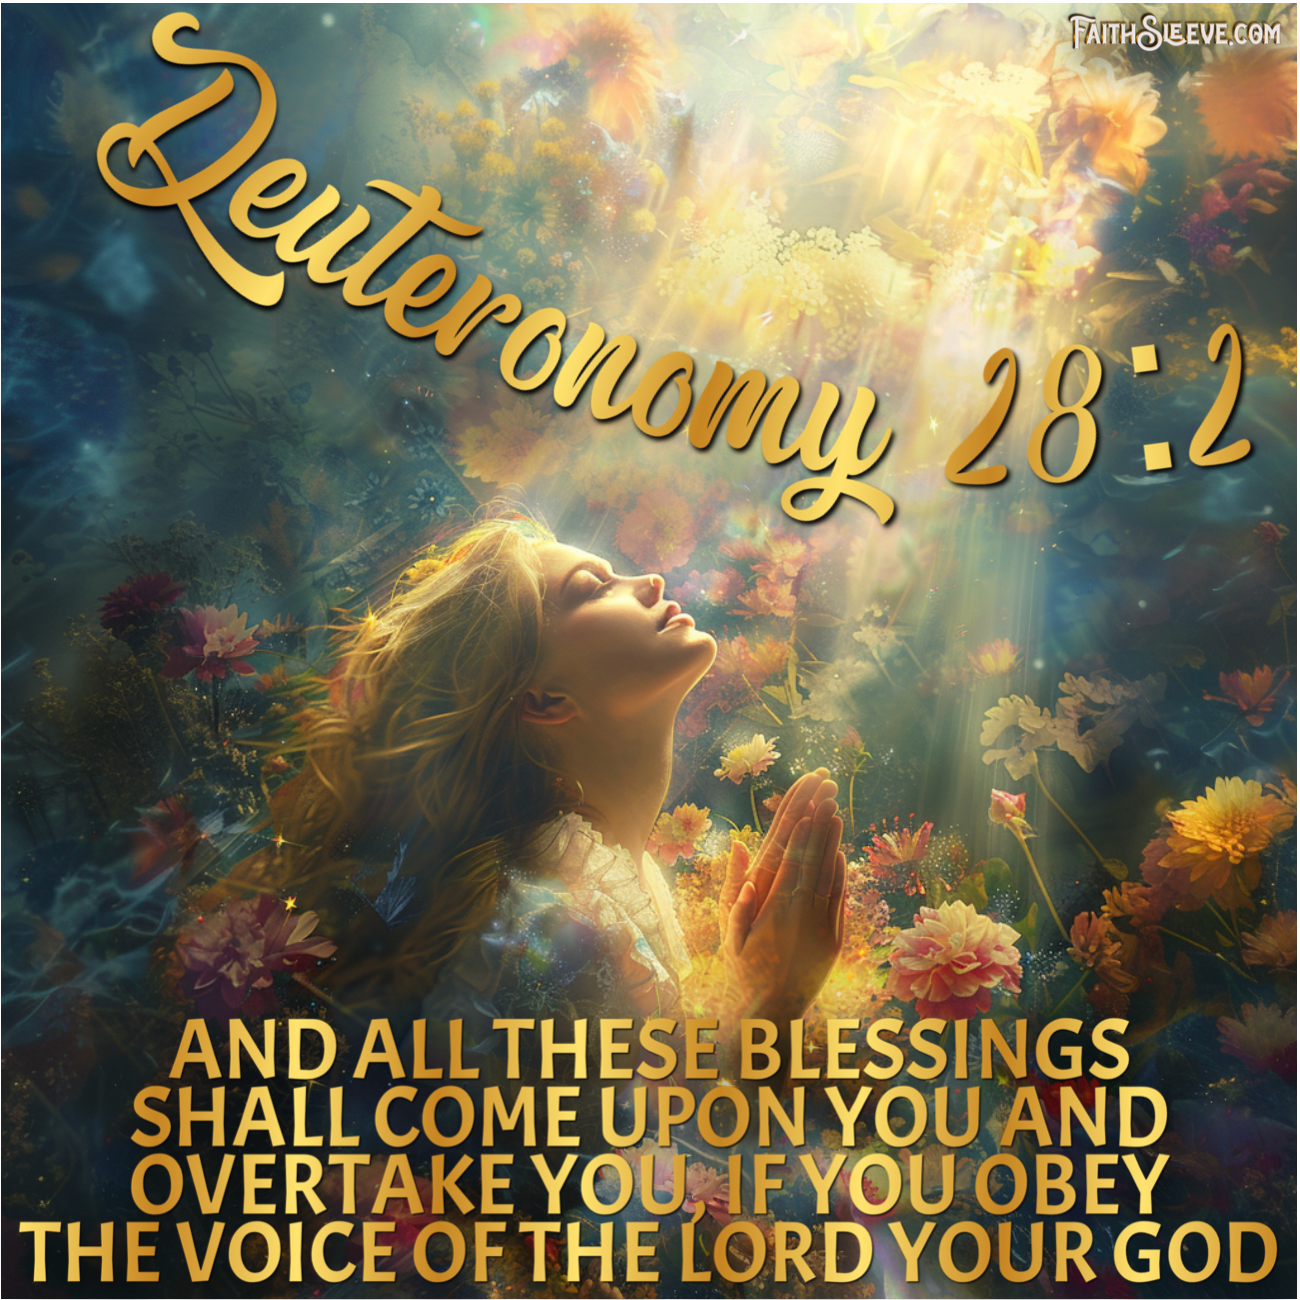 Deuteronomy 28:2 Bible Verse - Obey the Voice of the Lord